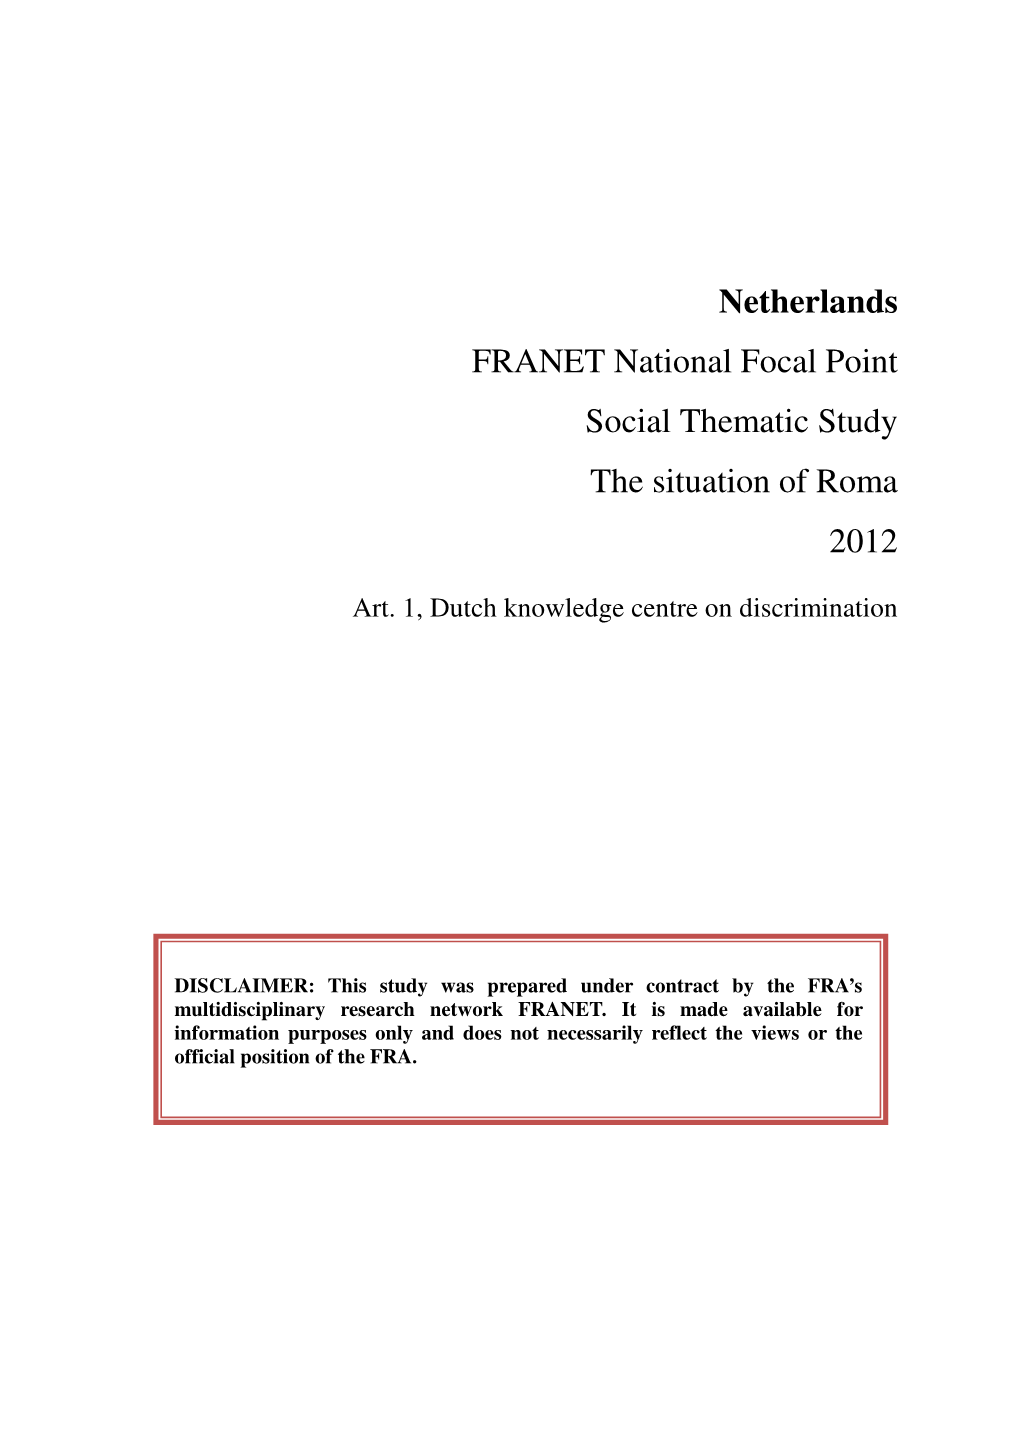 FRANET National Focal Point Social Thematic Study the Situation of Roma 2012